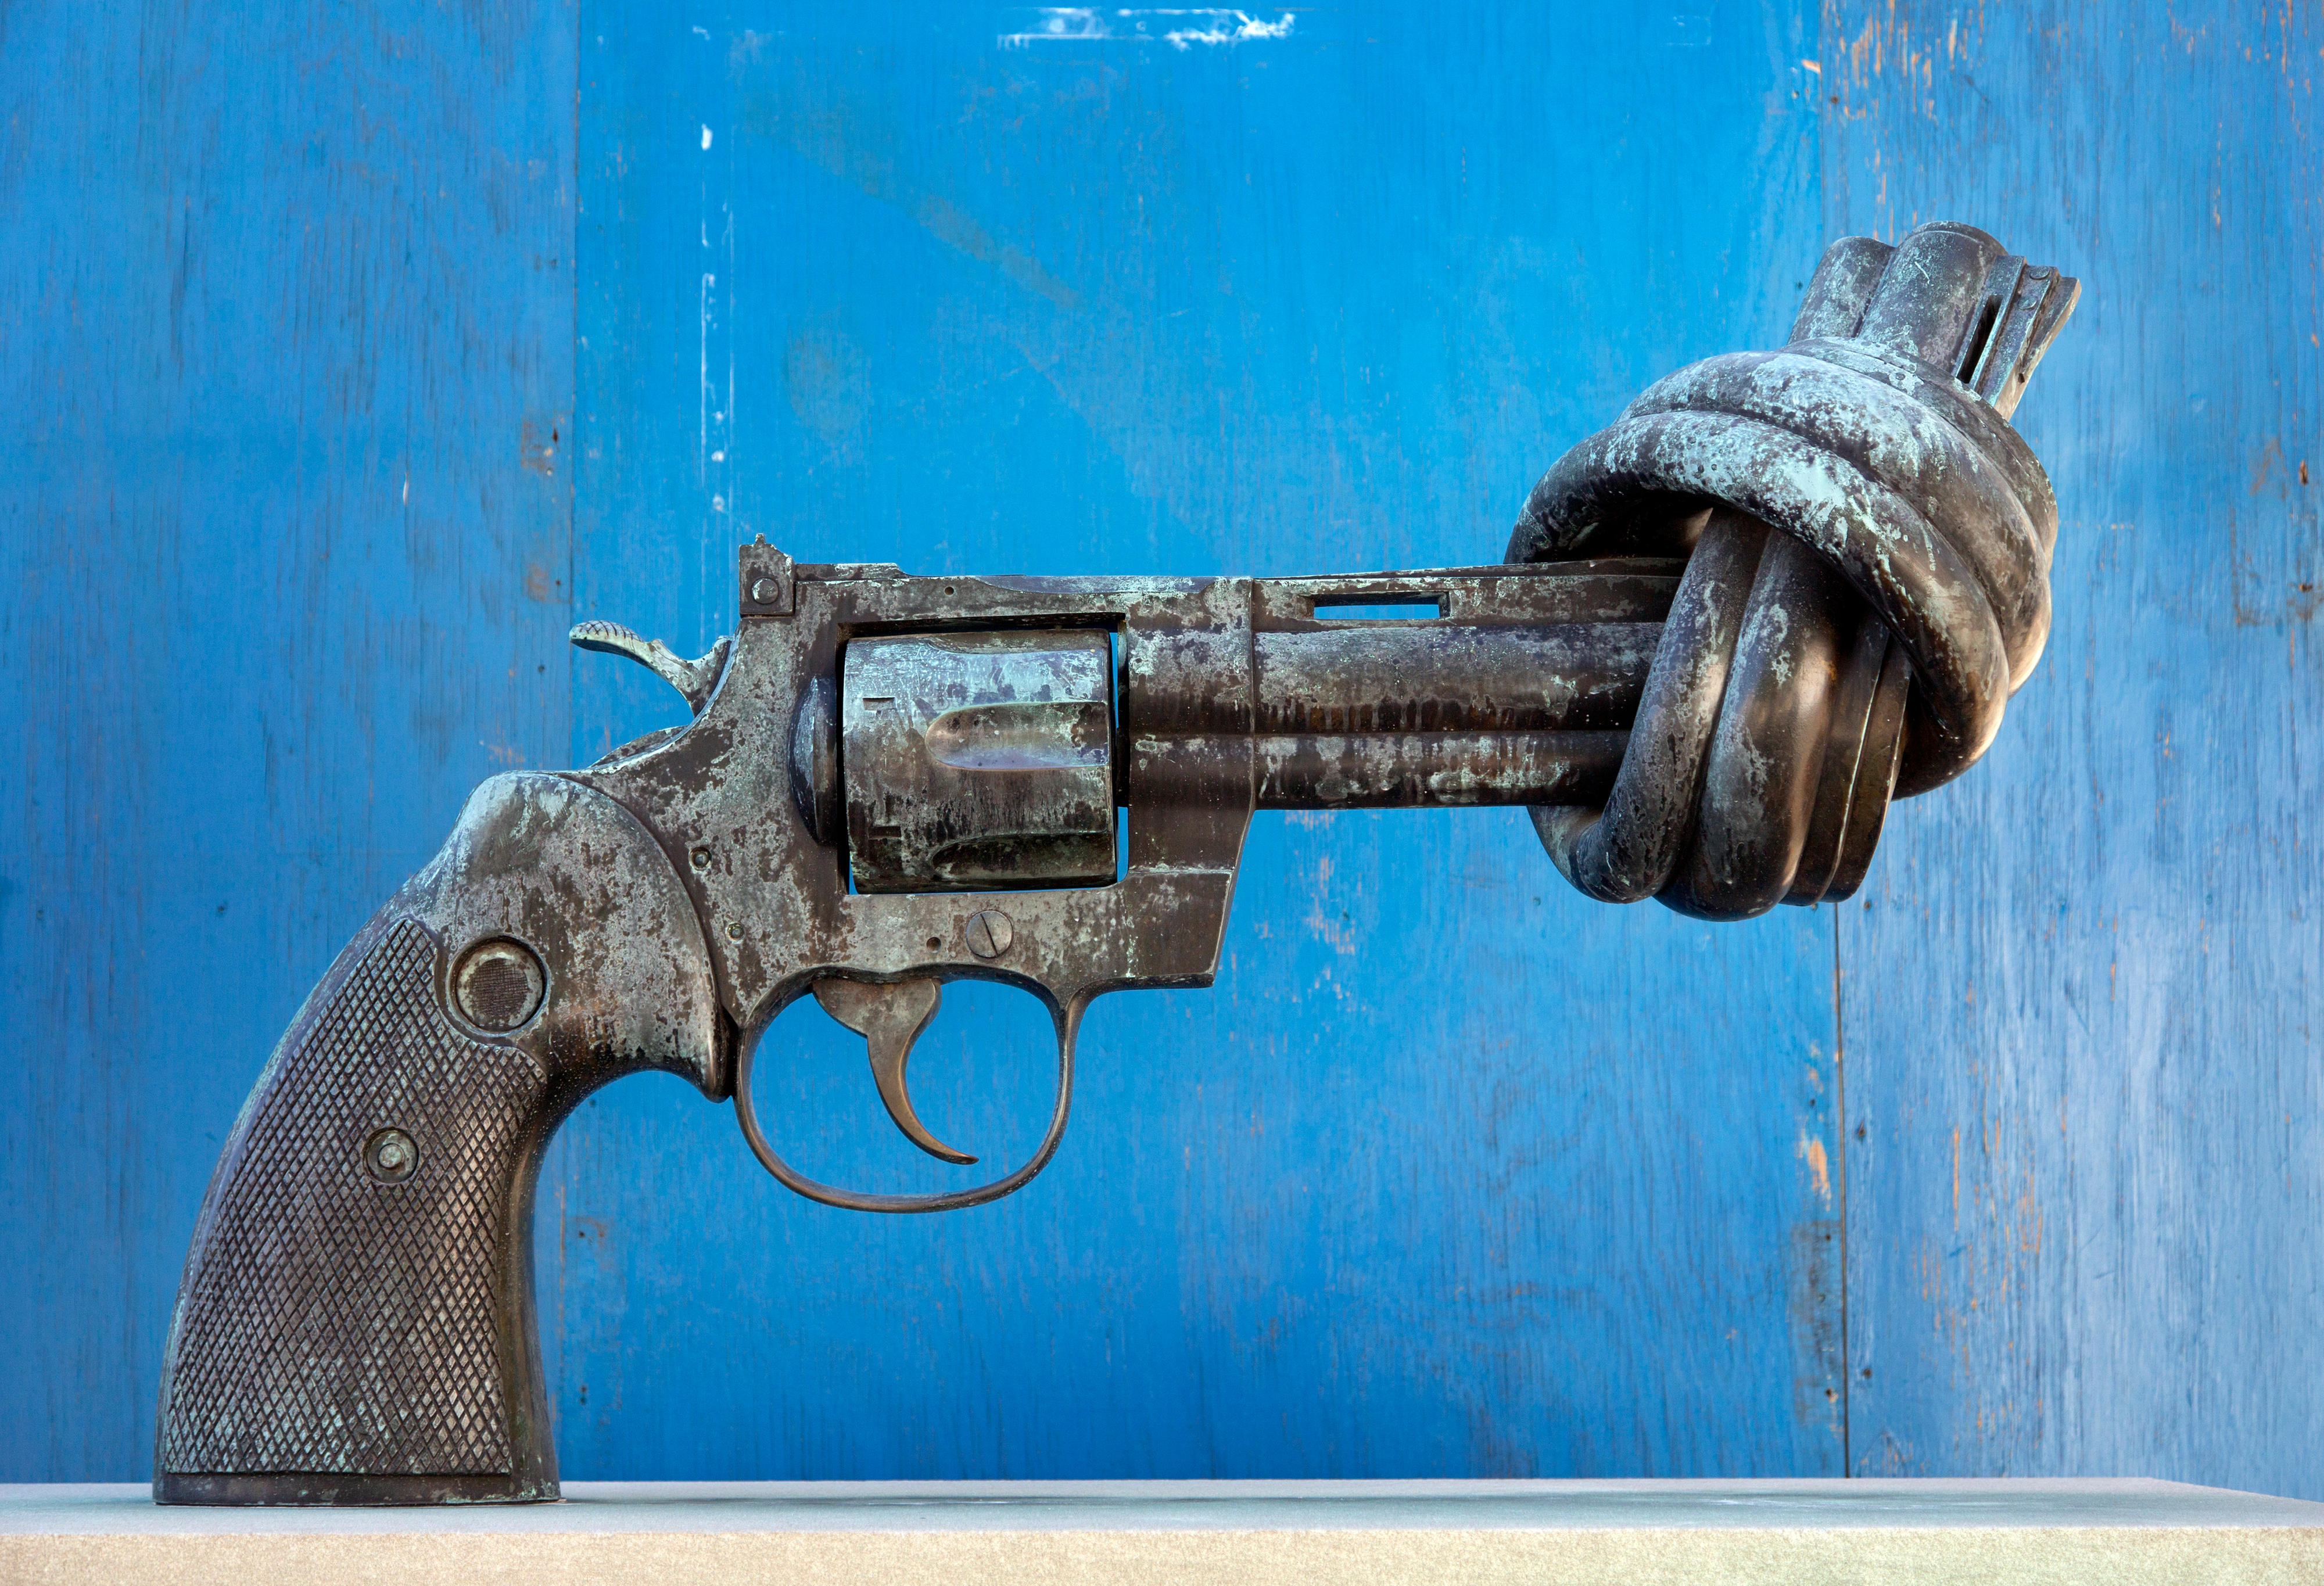 A knotted pistol: The work "Non Violence" by the Swedish artist Carl Fredrik Reuterswärd has stood as a peace symbol in front of the United Nations headquarters in New York since 1988.